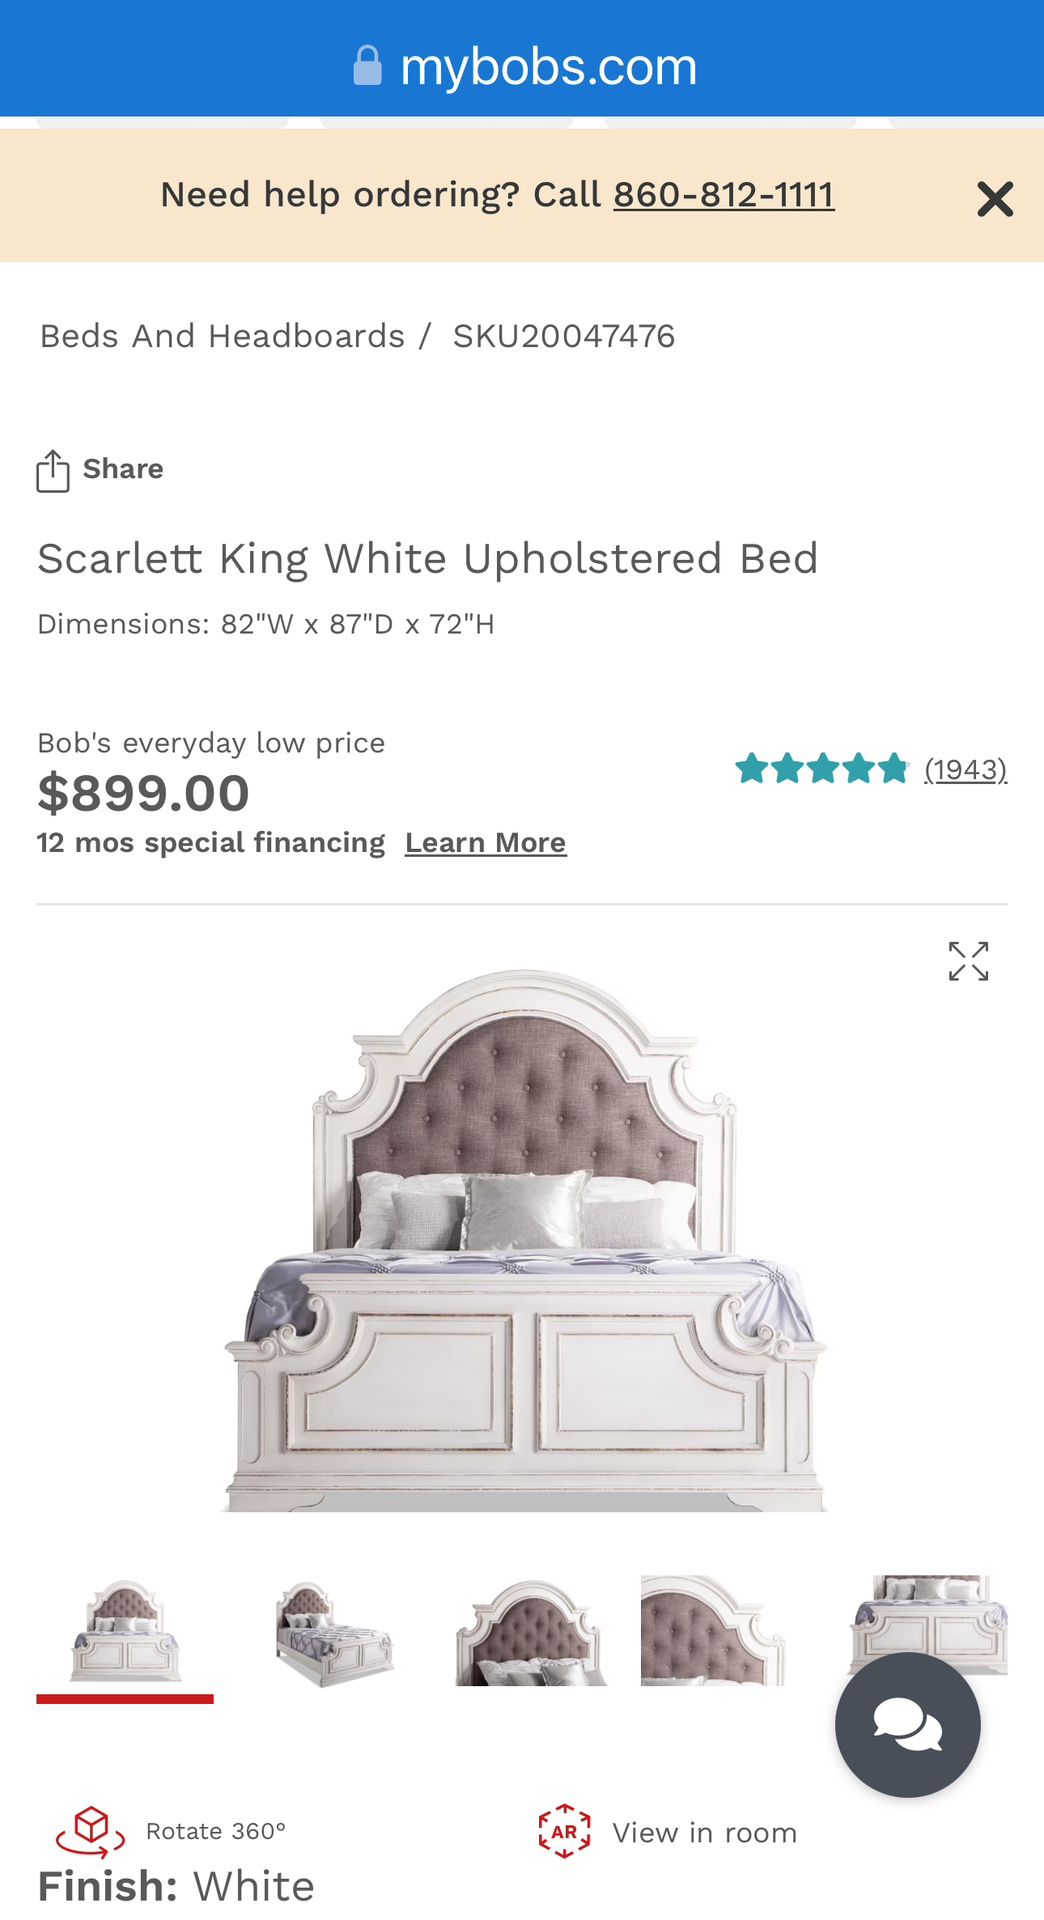 King Bed And Frame